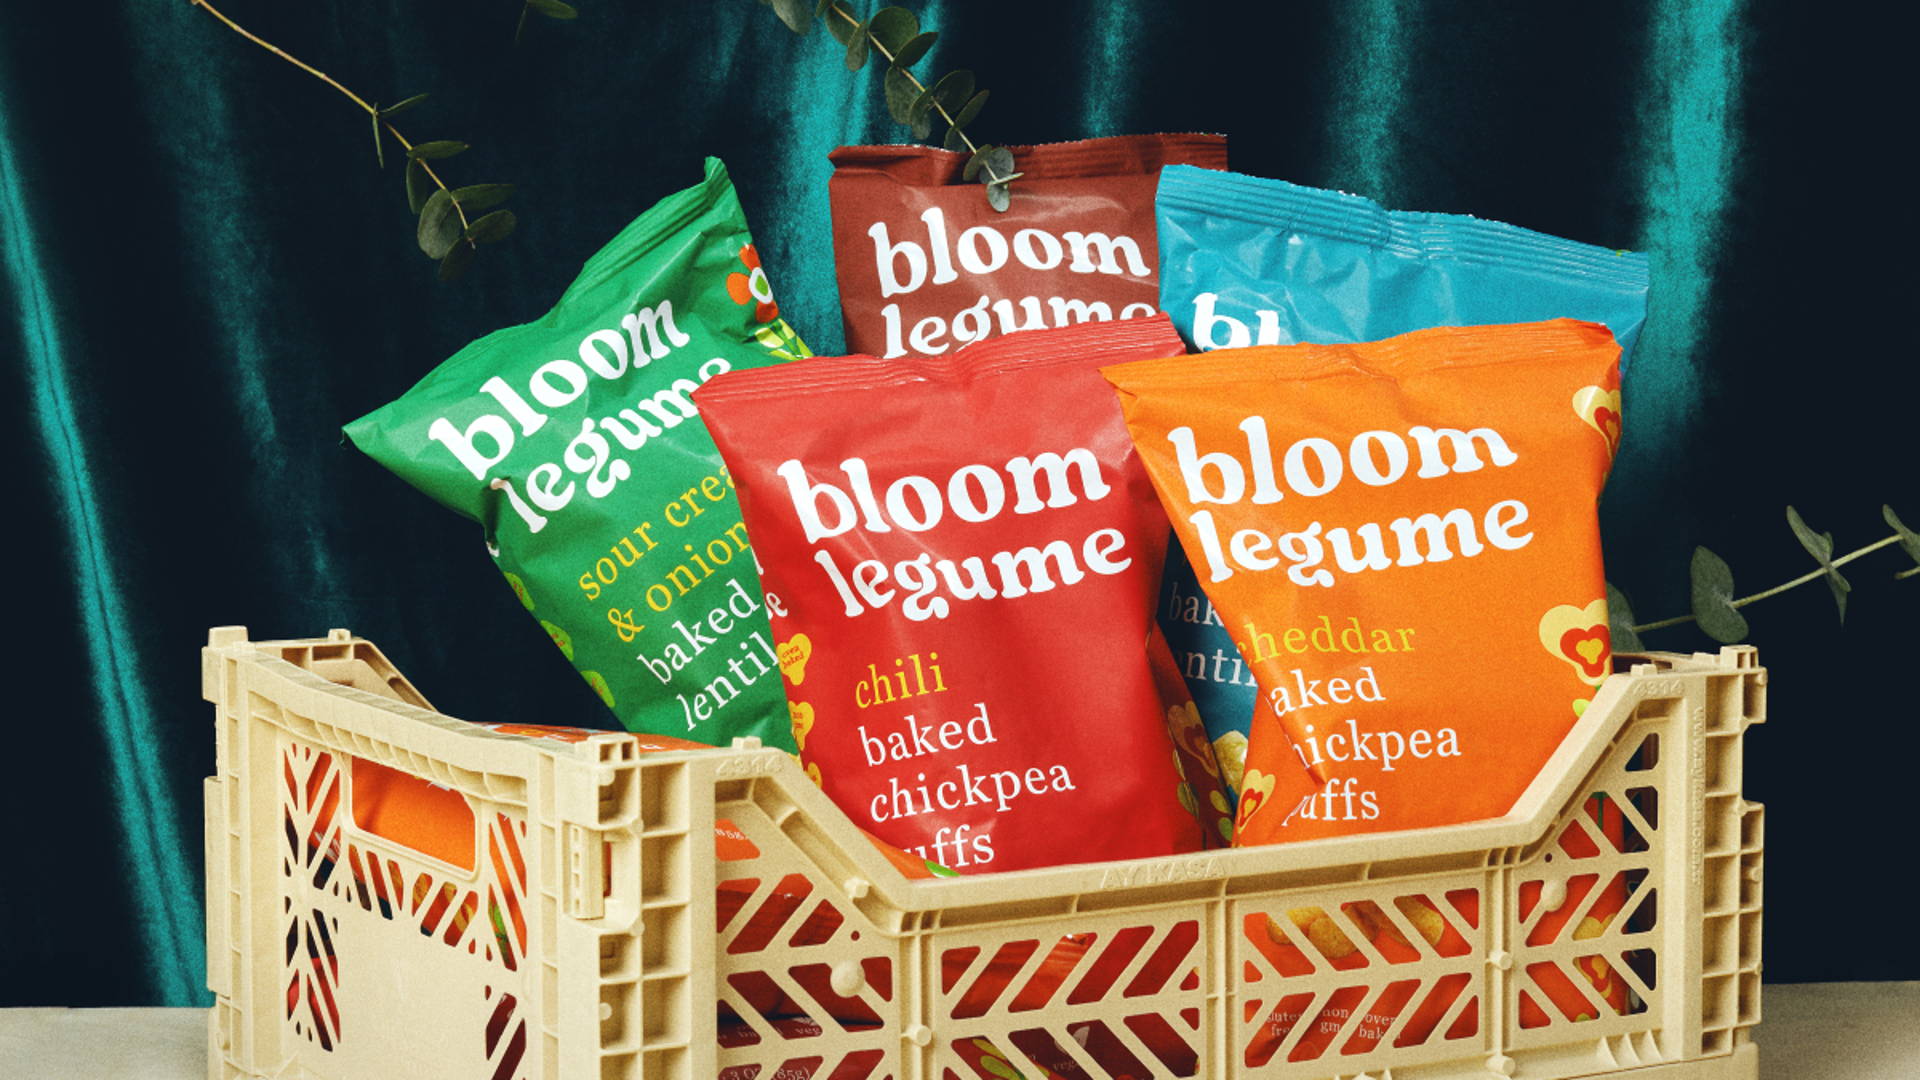 Featured image for Making Legumes Groovy With Bloom Legume's 70s Inspired Packaging